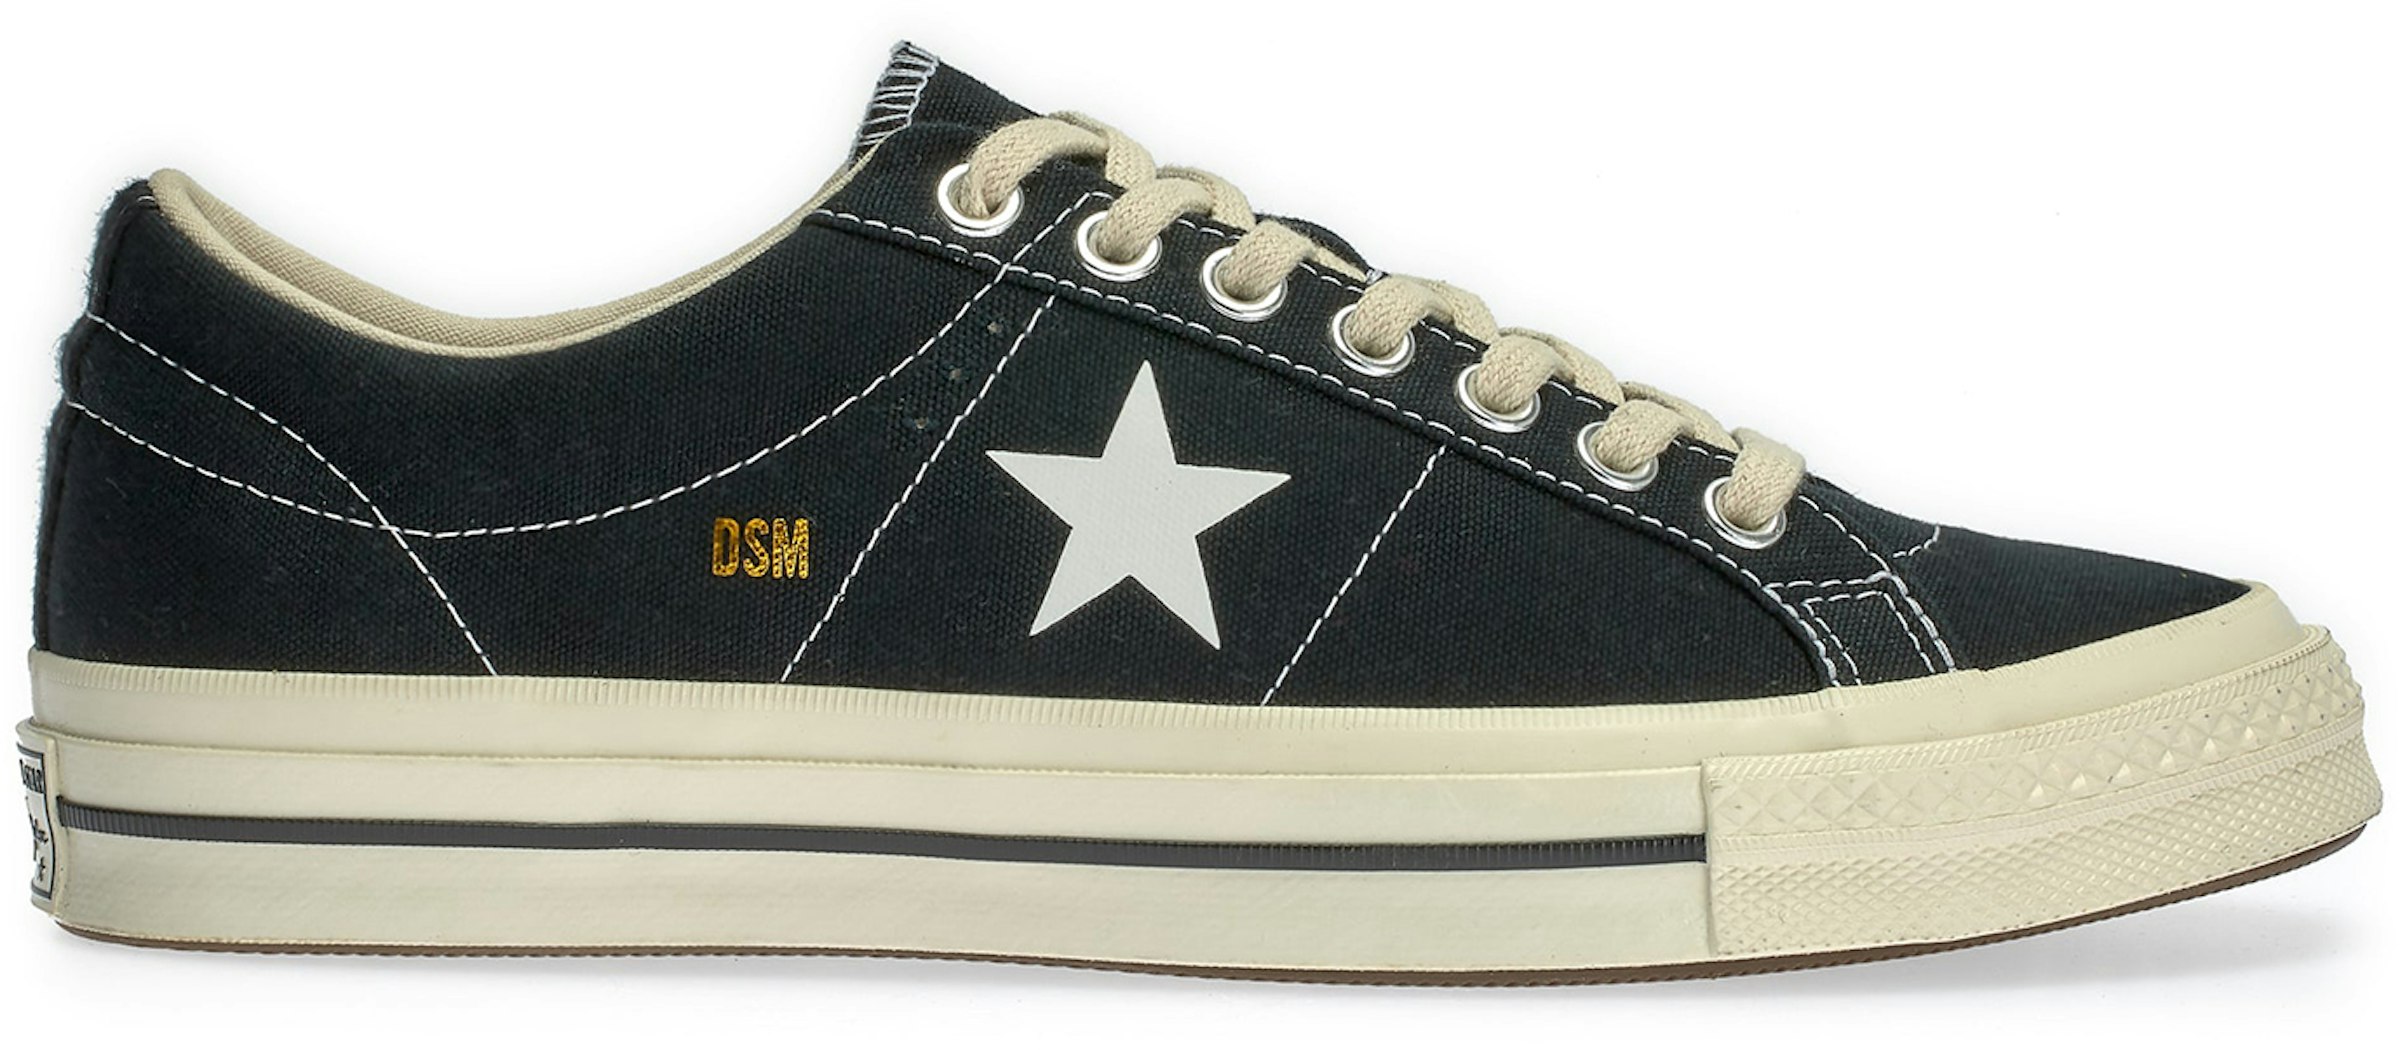 Converse One Star Canvas Ox Dover Black - - US